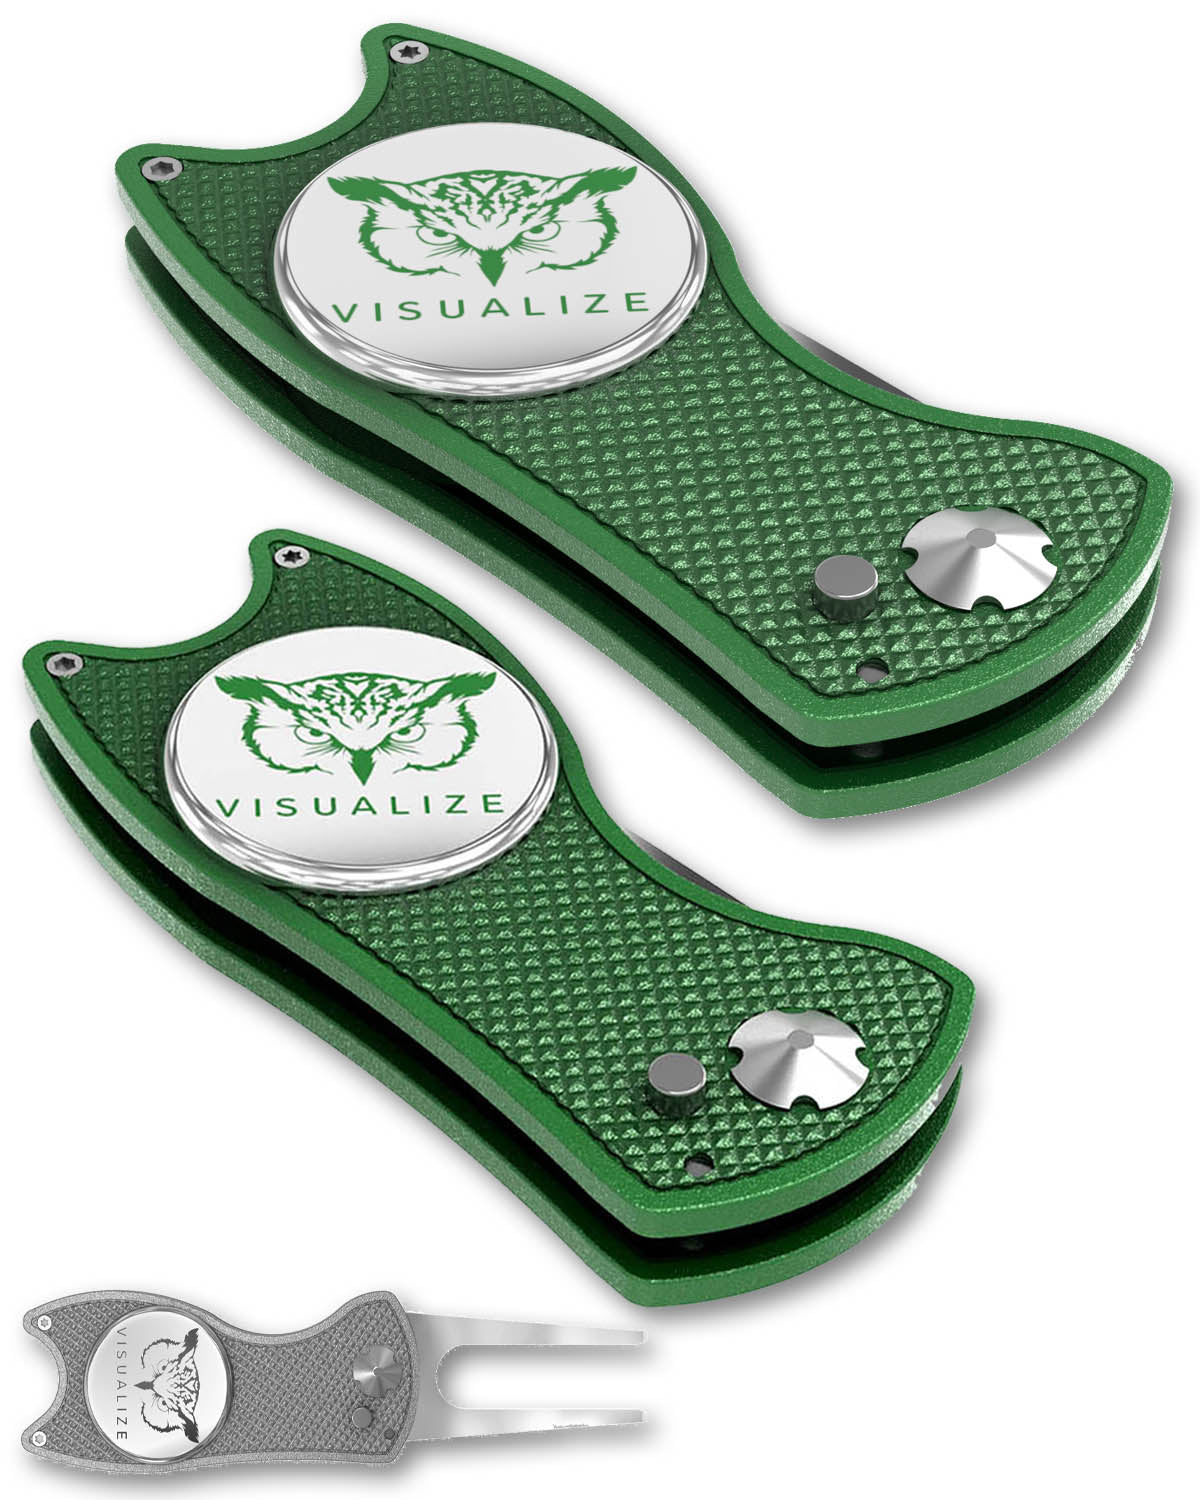 2 visualize divot tools closed, and one open. 